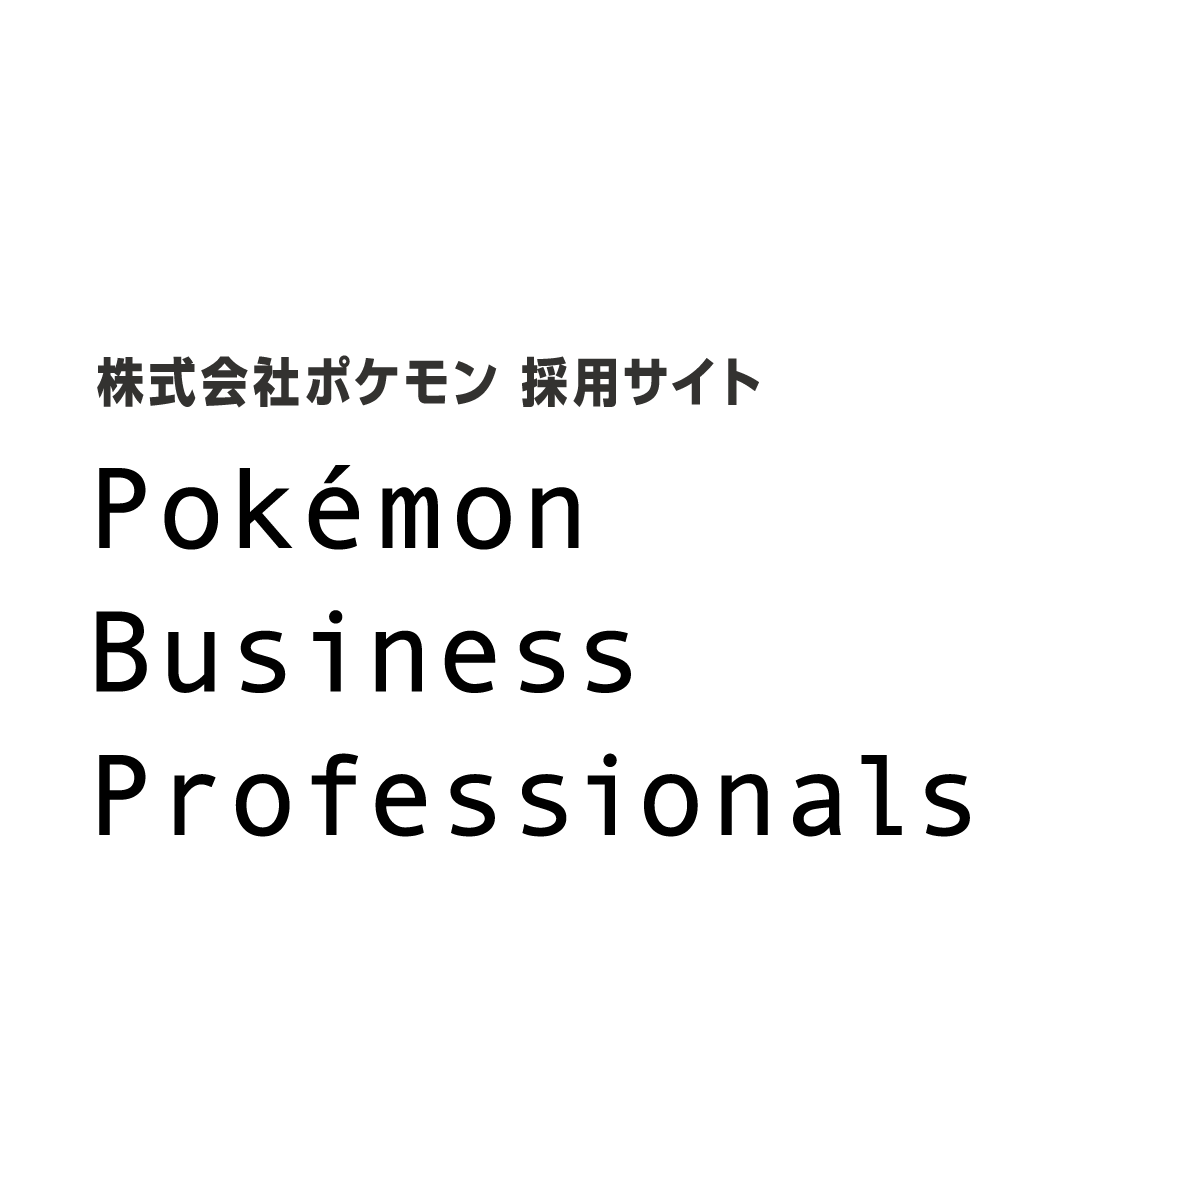 Special Interview ポケモンビジネス 徹底解剖 Special Interview Pokemon Business Professionals 株式会社ポケモン採用情報